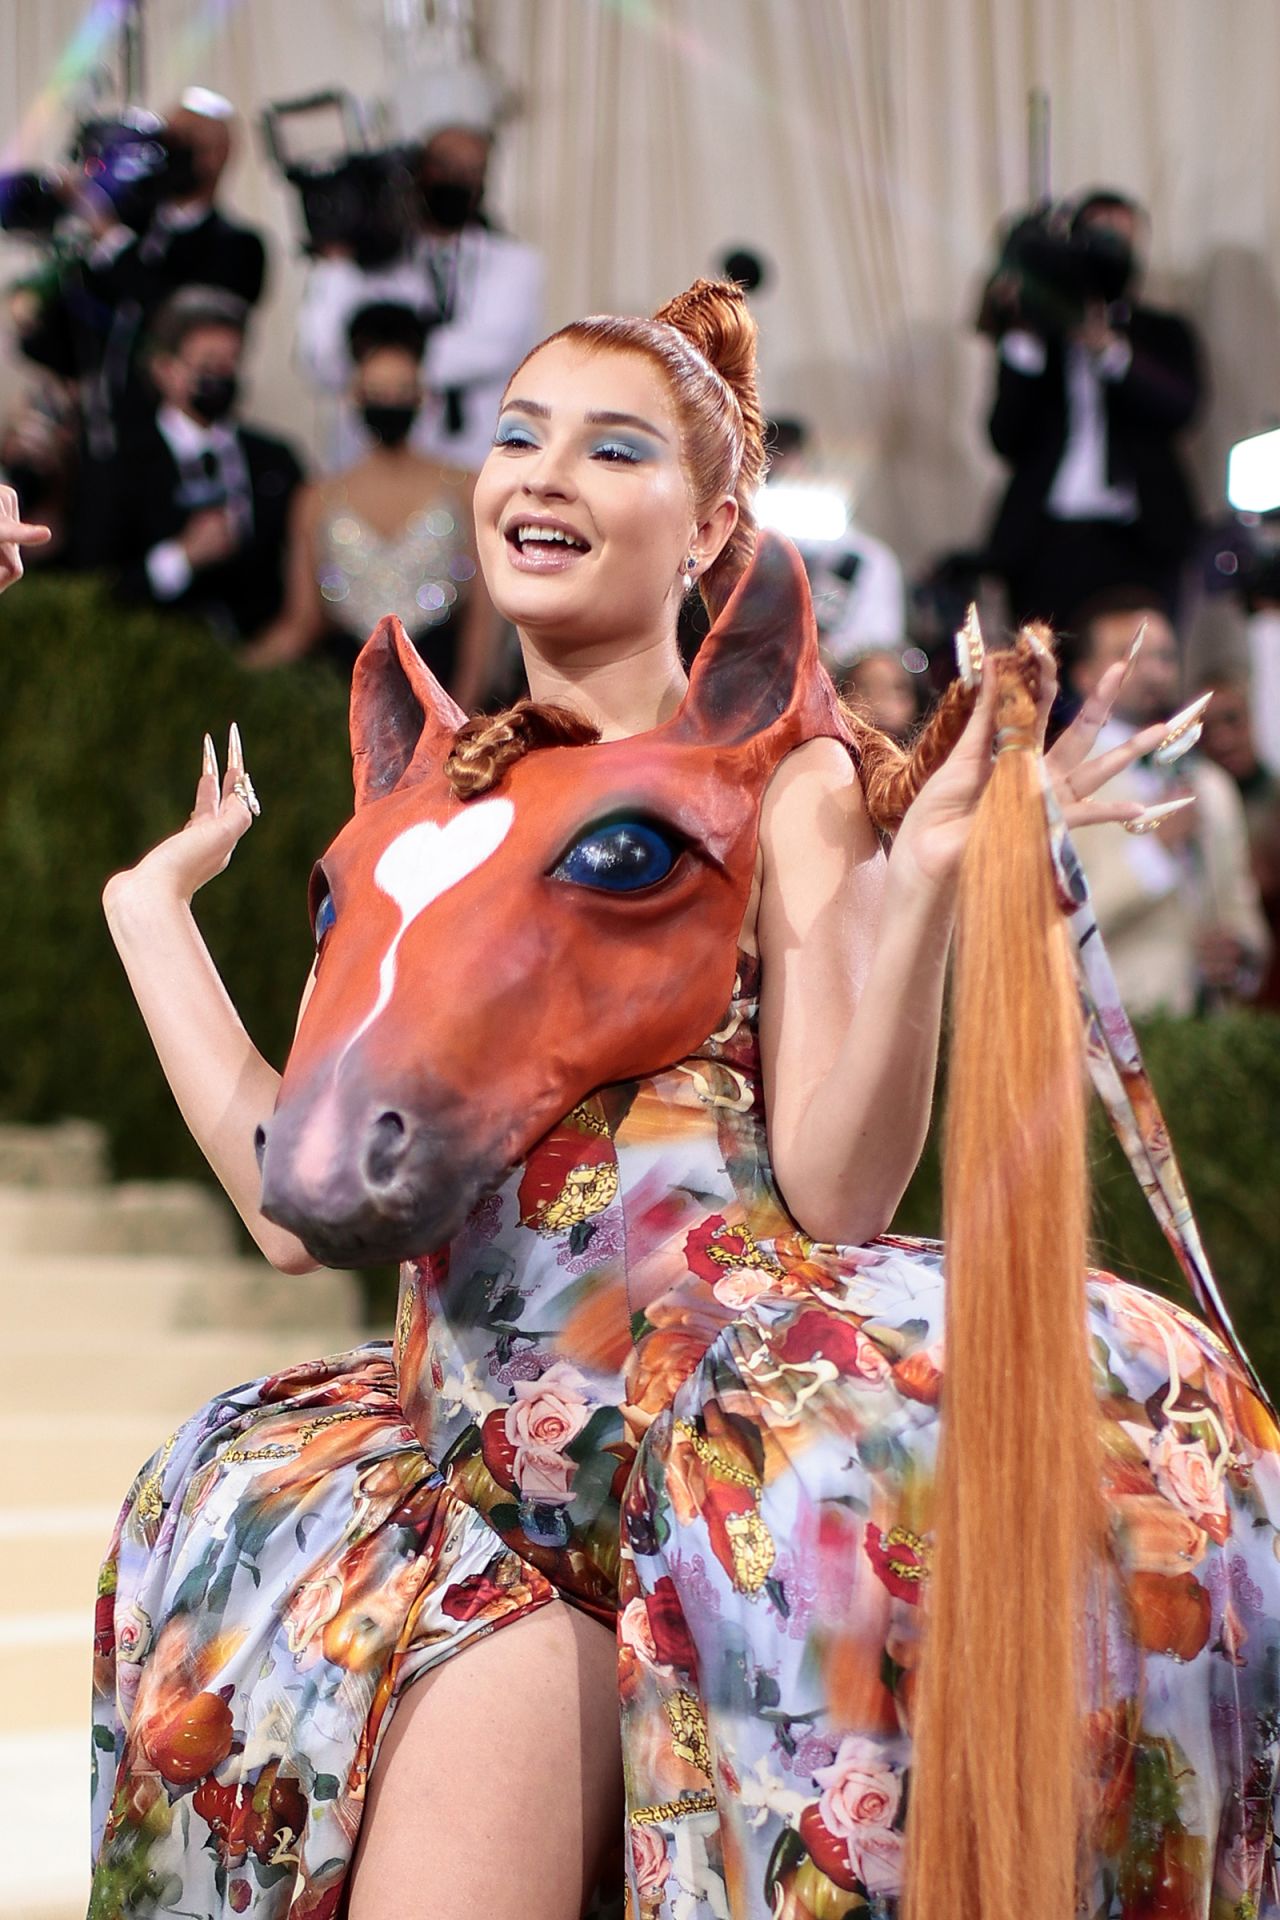 Kim Petras wore one of the more unusual looks of the night, donning a floral ballgown and horse head top by Collina Strada.